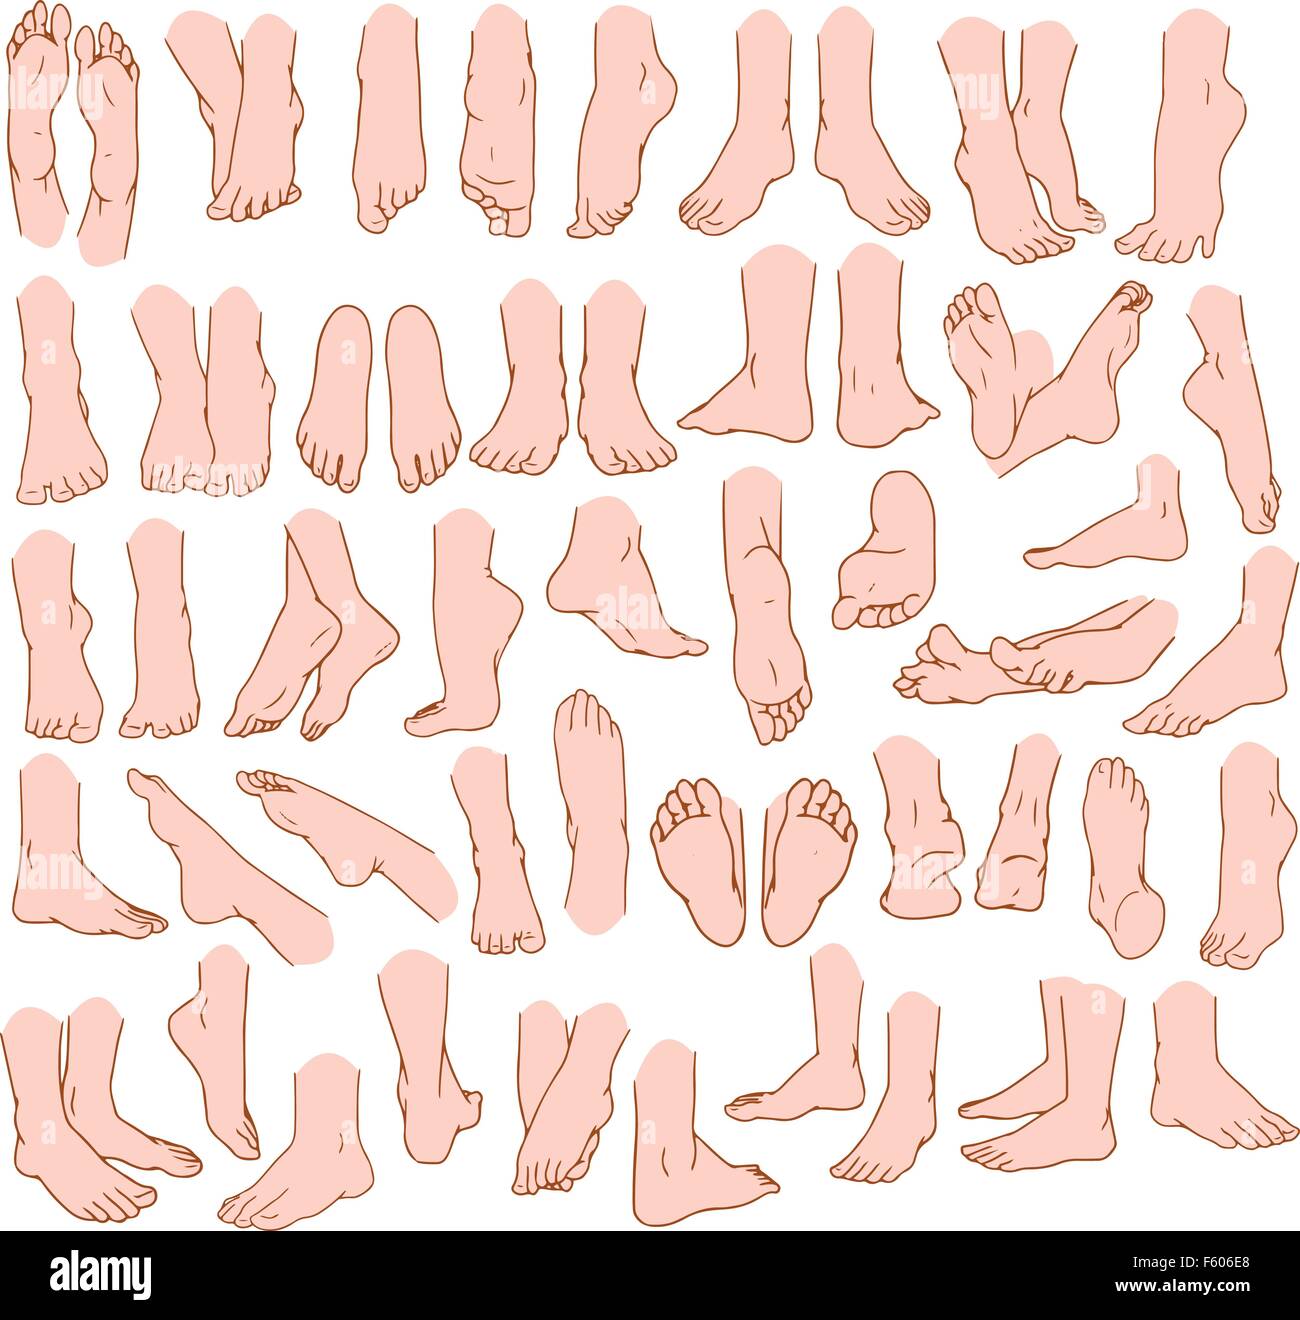 Vector illustrations pack of human feet in various gestures. Stock Vector